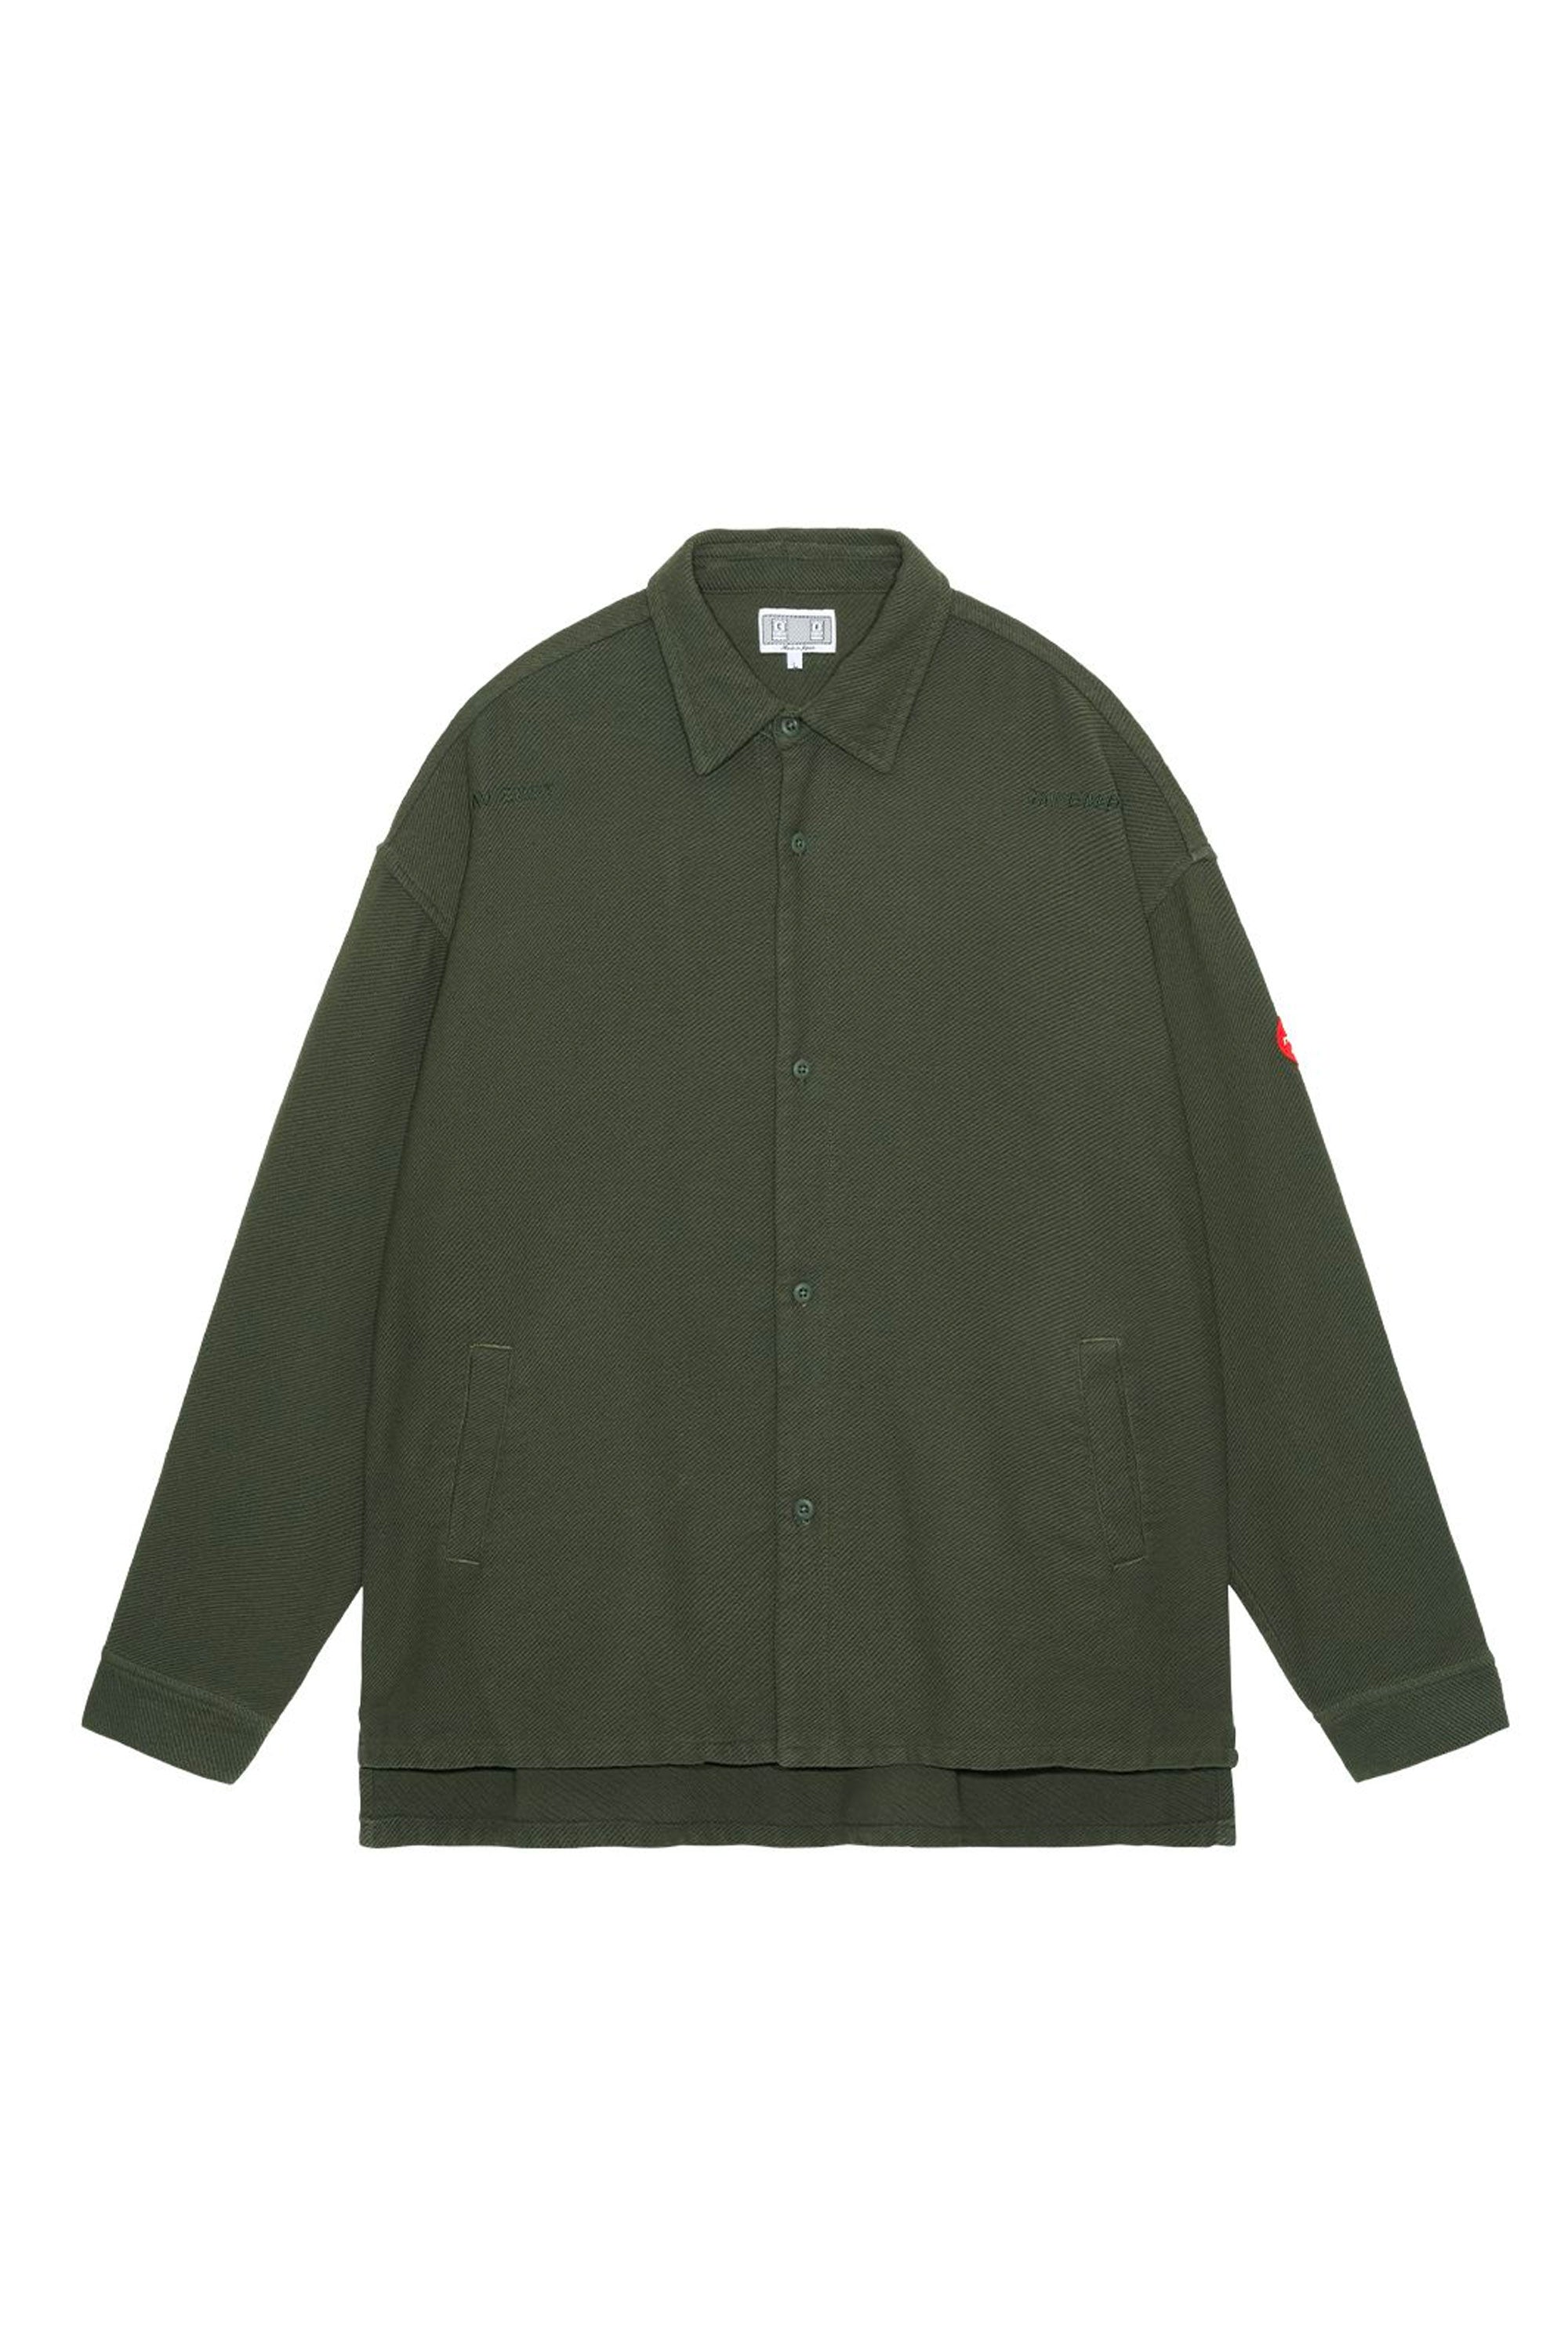 The CAV EMPT - WELT POCKETS BIG SHIRT GREEN available online with global shipping, and in PAM Stores Melbourne and Sydney.